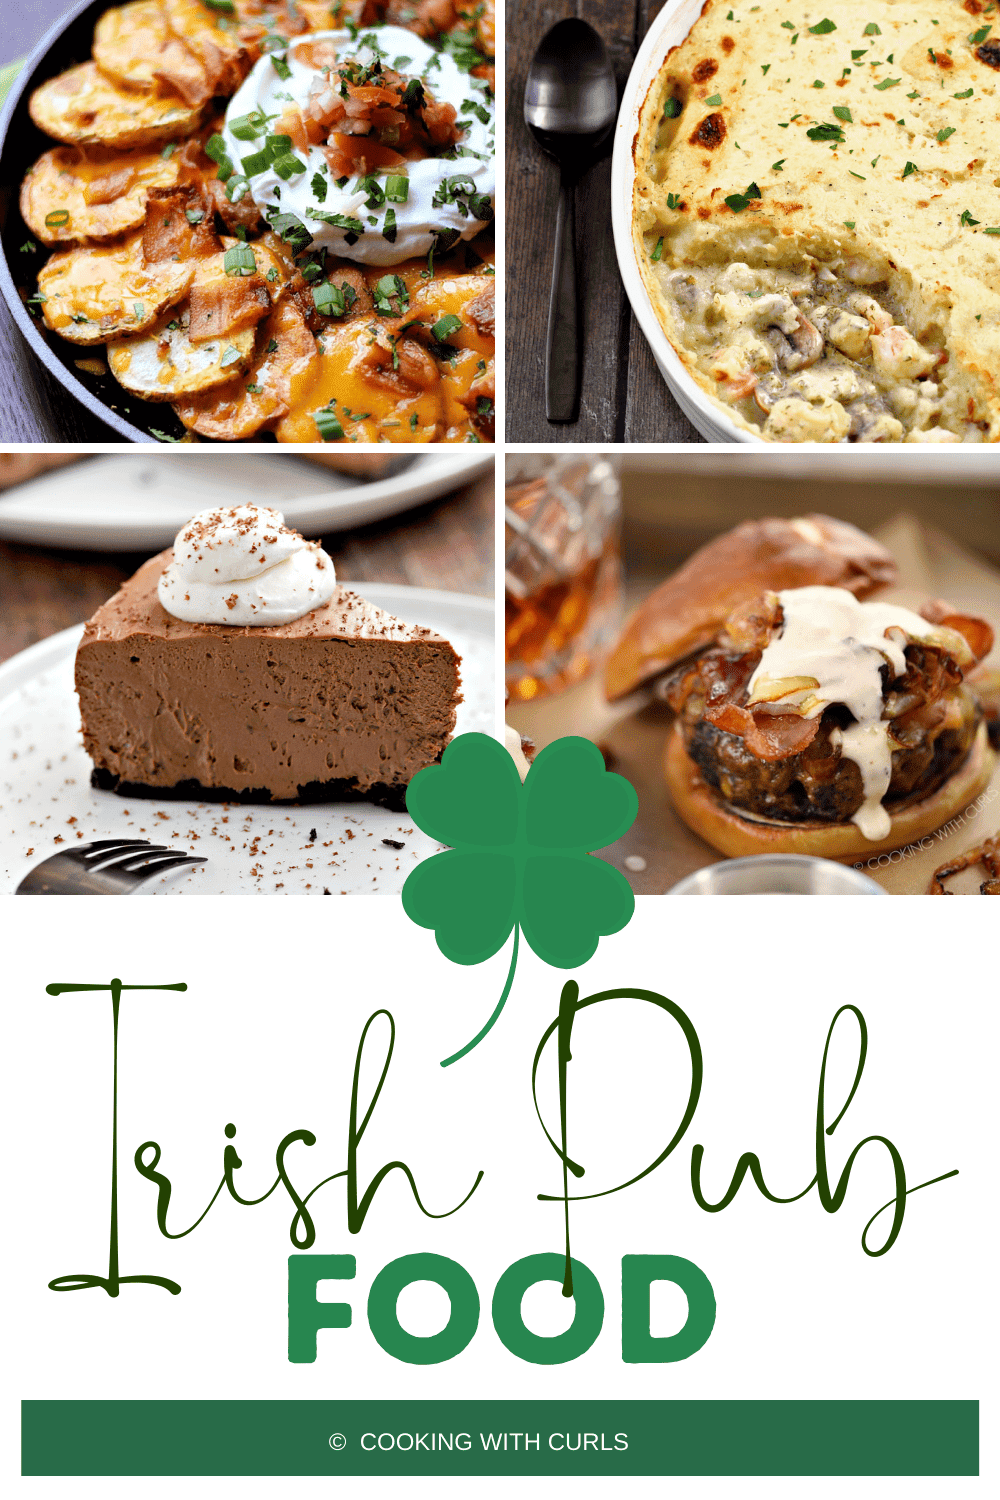 Irish Pub Food collage with four food images, a green shamrock, and title graphic across the bottom.